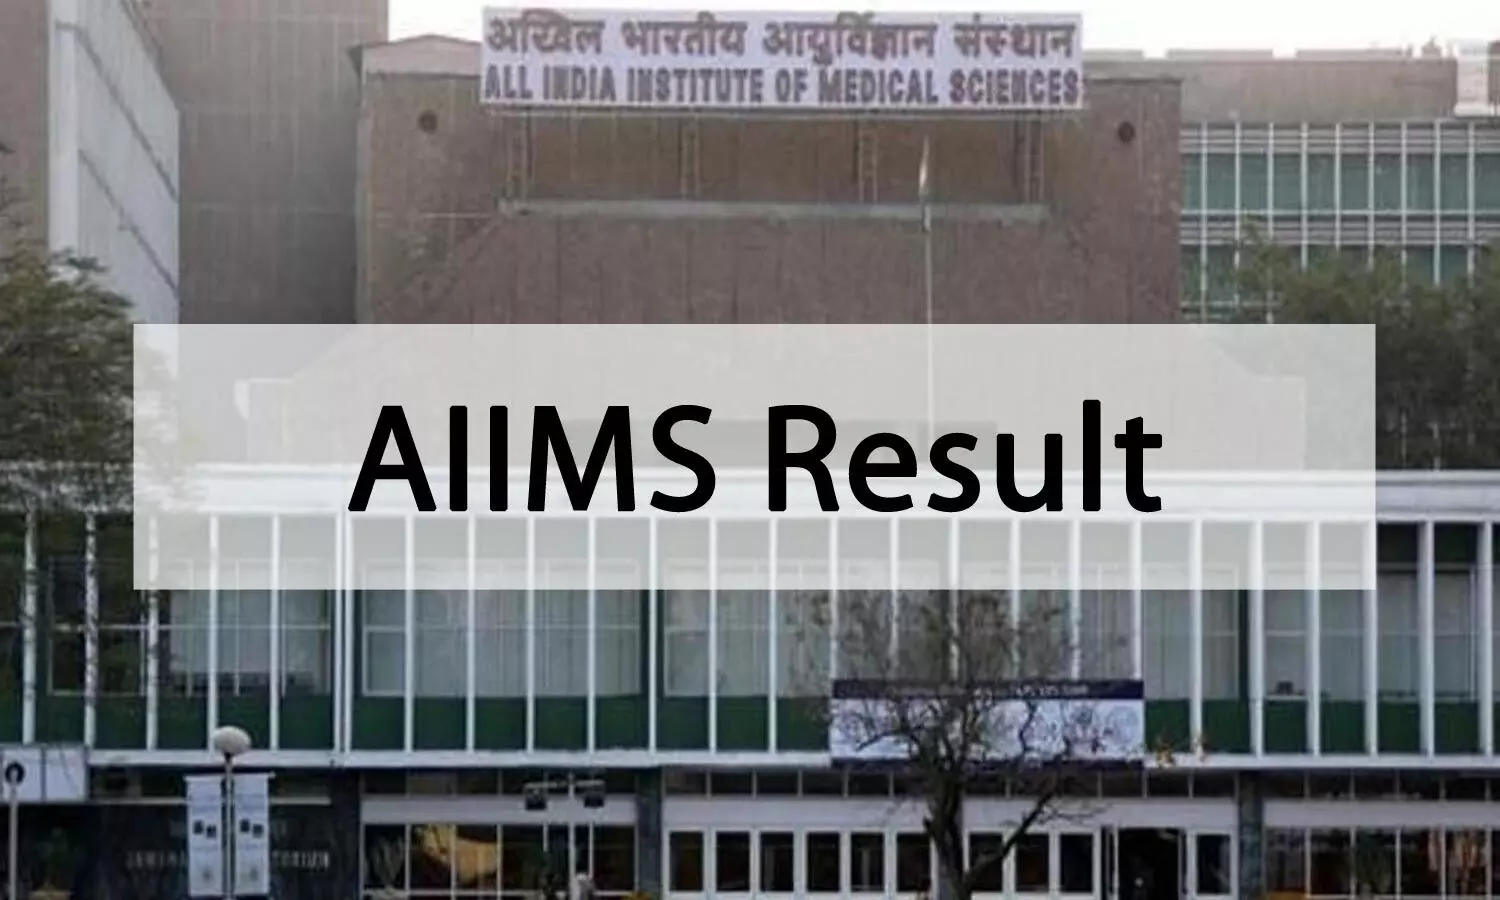 AIIMS delays publication of results for BSc Nursing Hons, MSc, Paramedical courses 2020